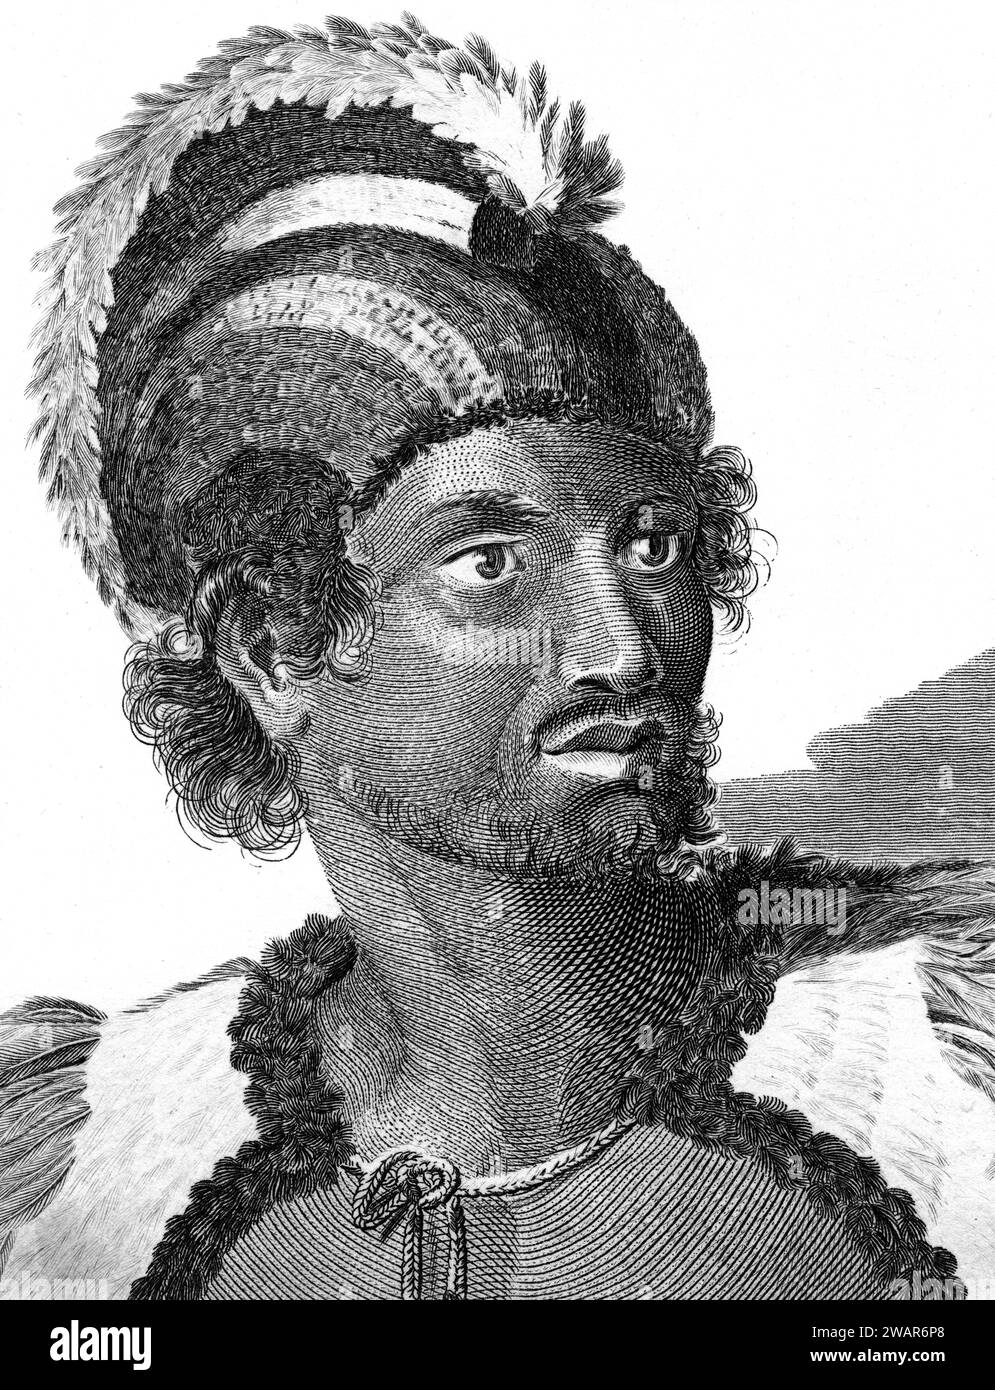 Portrait of Indigenous Man of Hawaii Wearing Headdress Vintage or Historic Illustration or Engraving 1794 Stock Photo